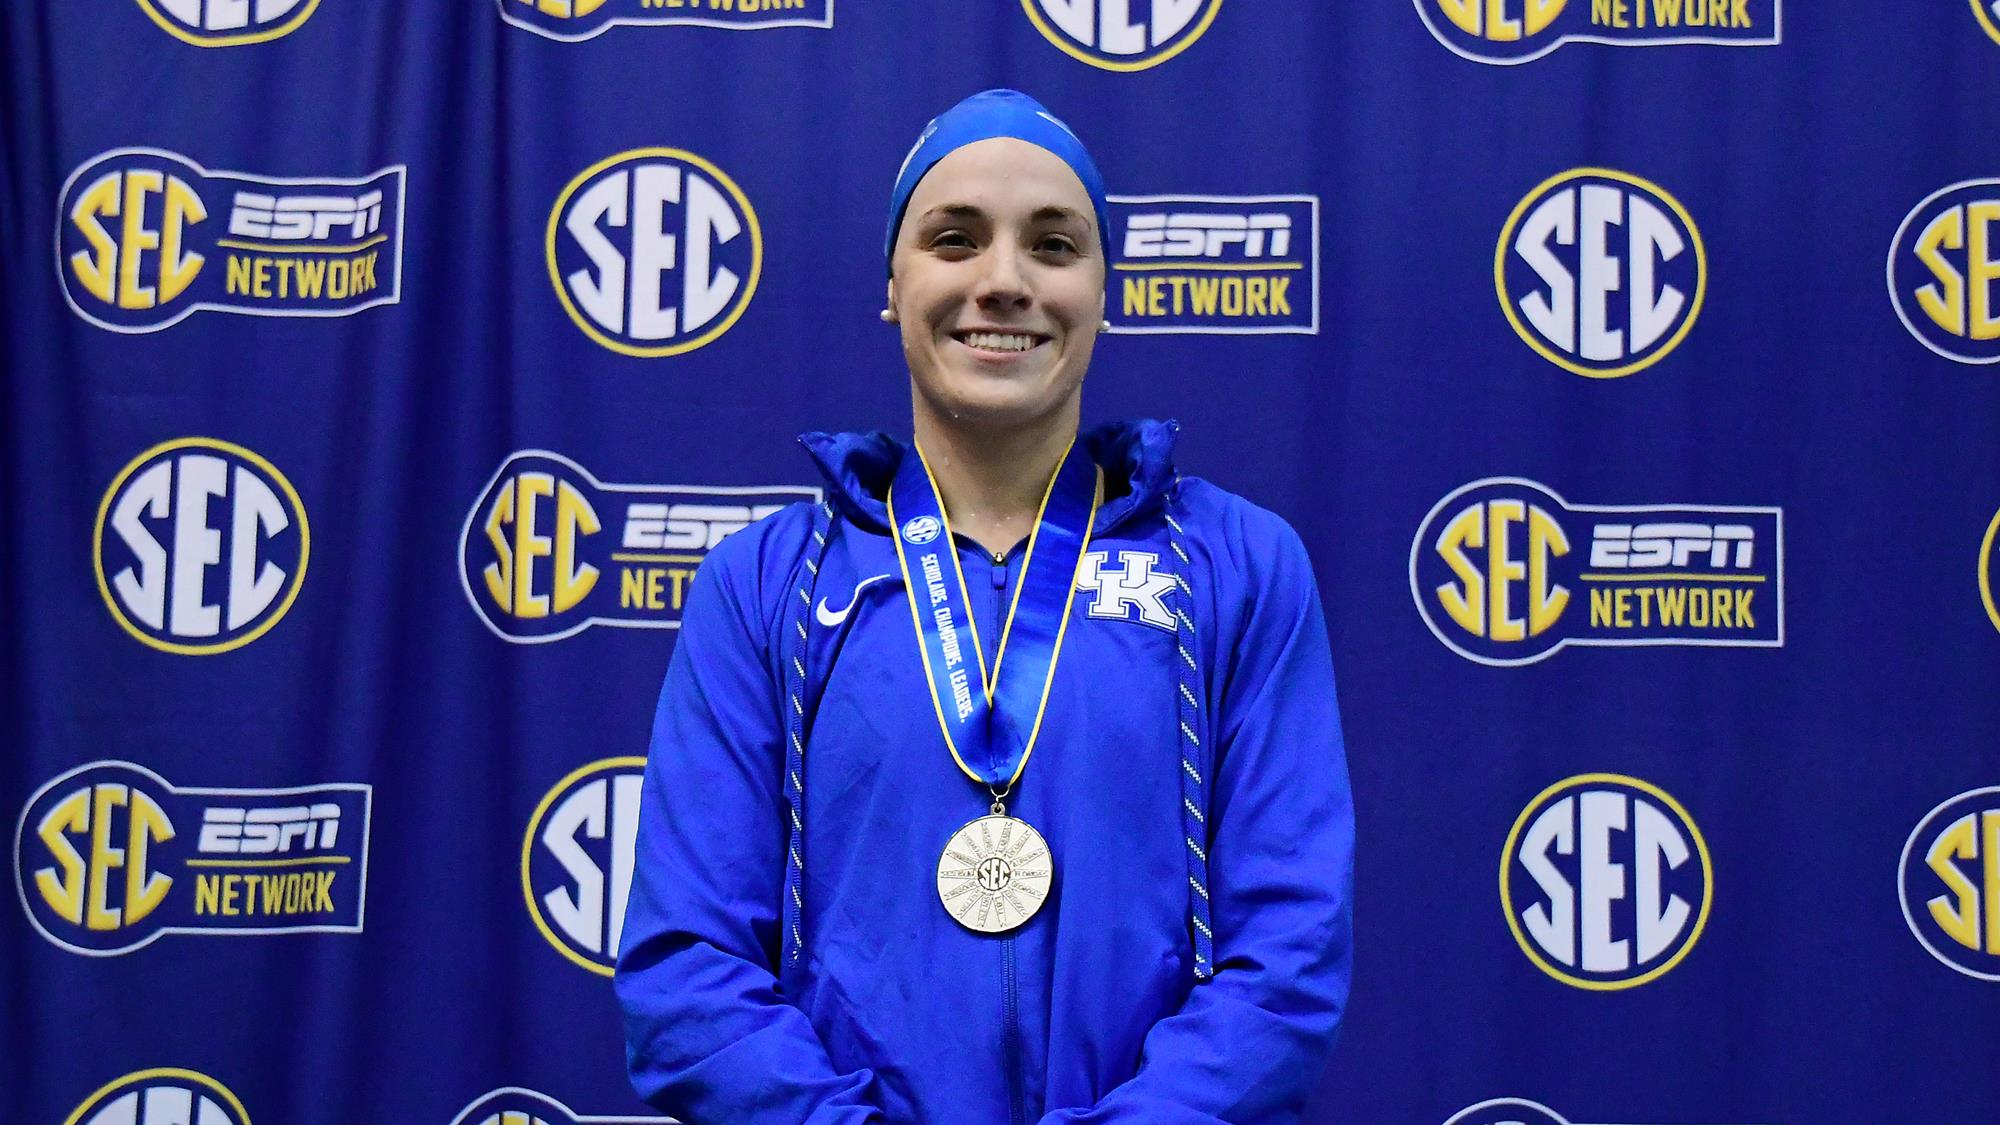 Seniors Collect Two Medals, Break Two School Records on Second Night of SEC Championships